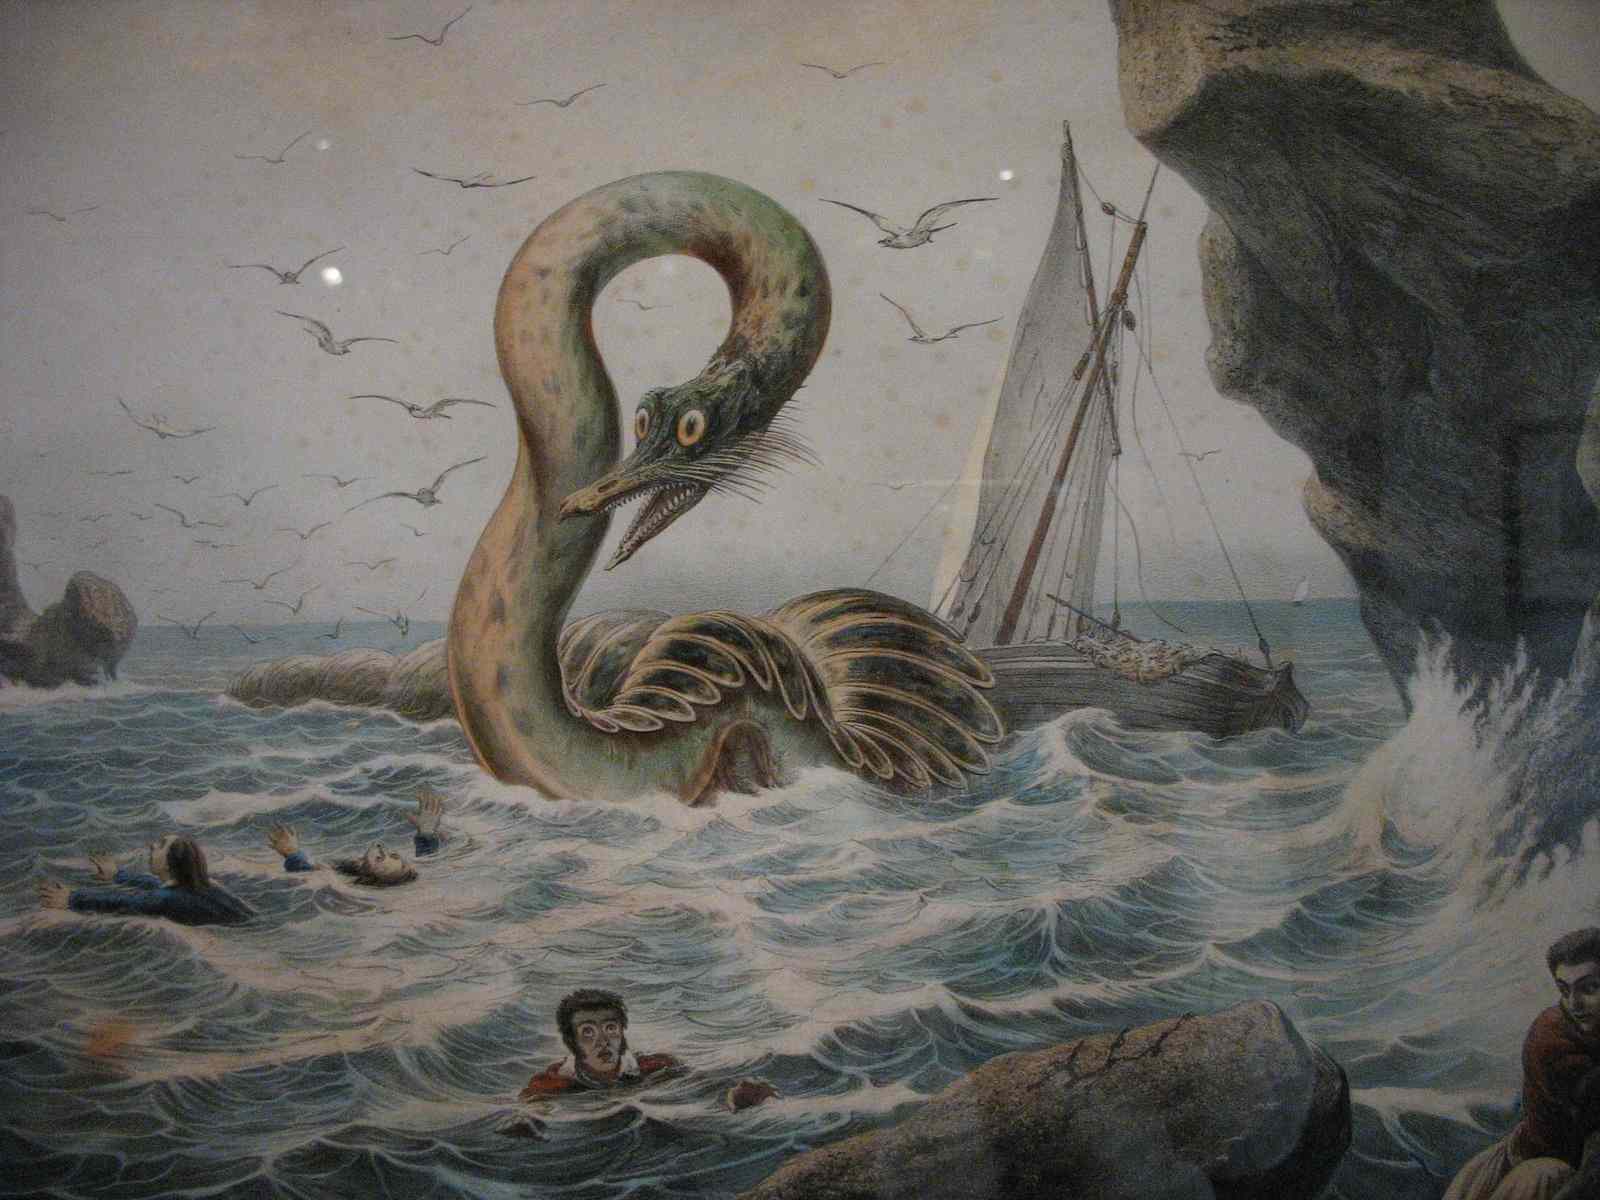 A painting of a giant sea serpent at the base of a cliff. Terrified